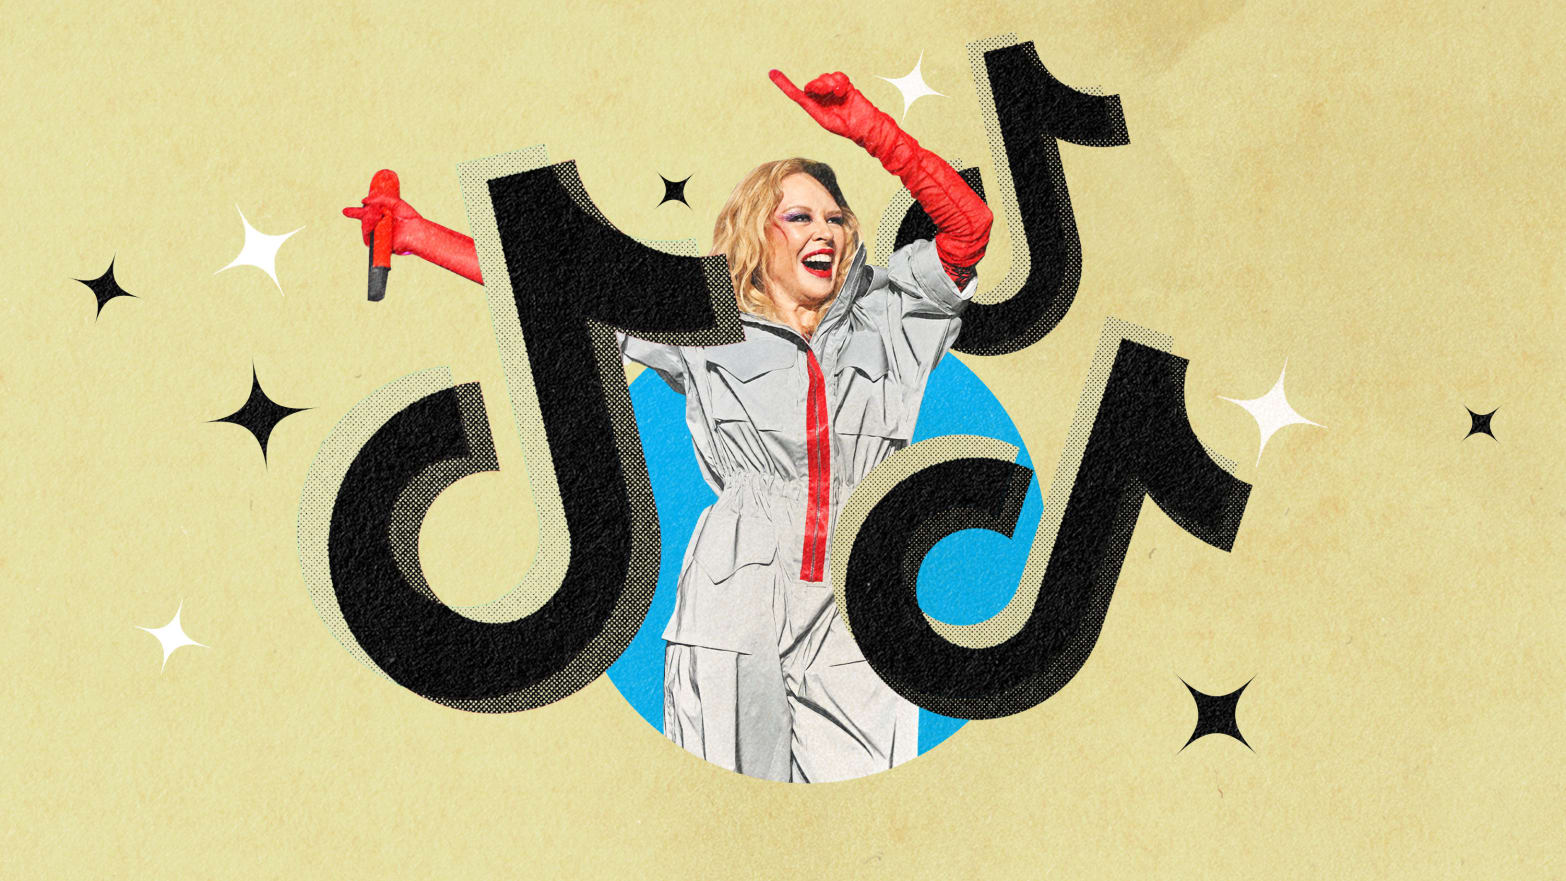 A photo illustration featuring Kylie Minogue singing among the TikTok logo